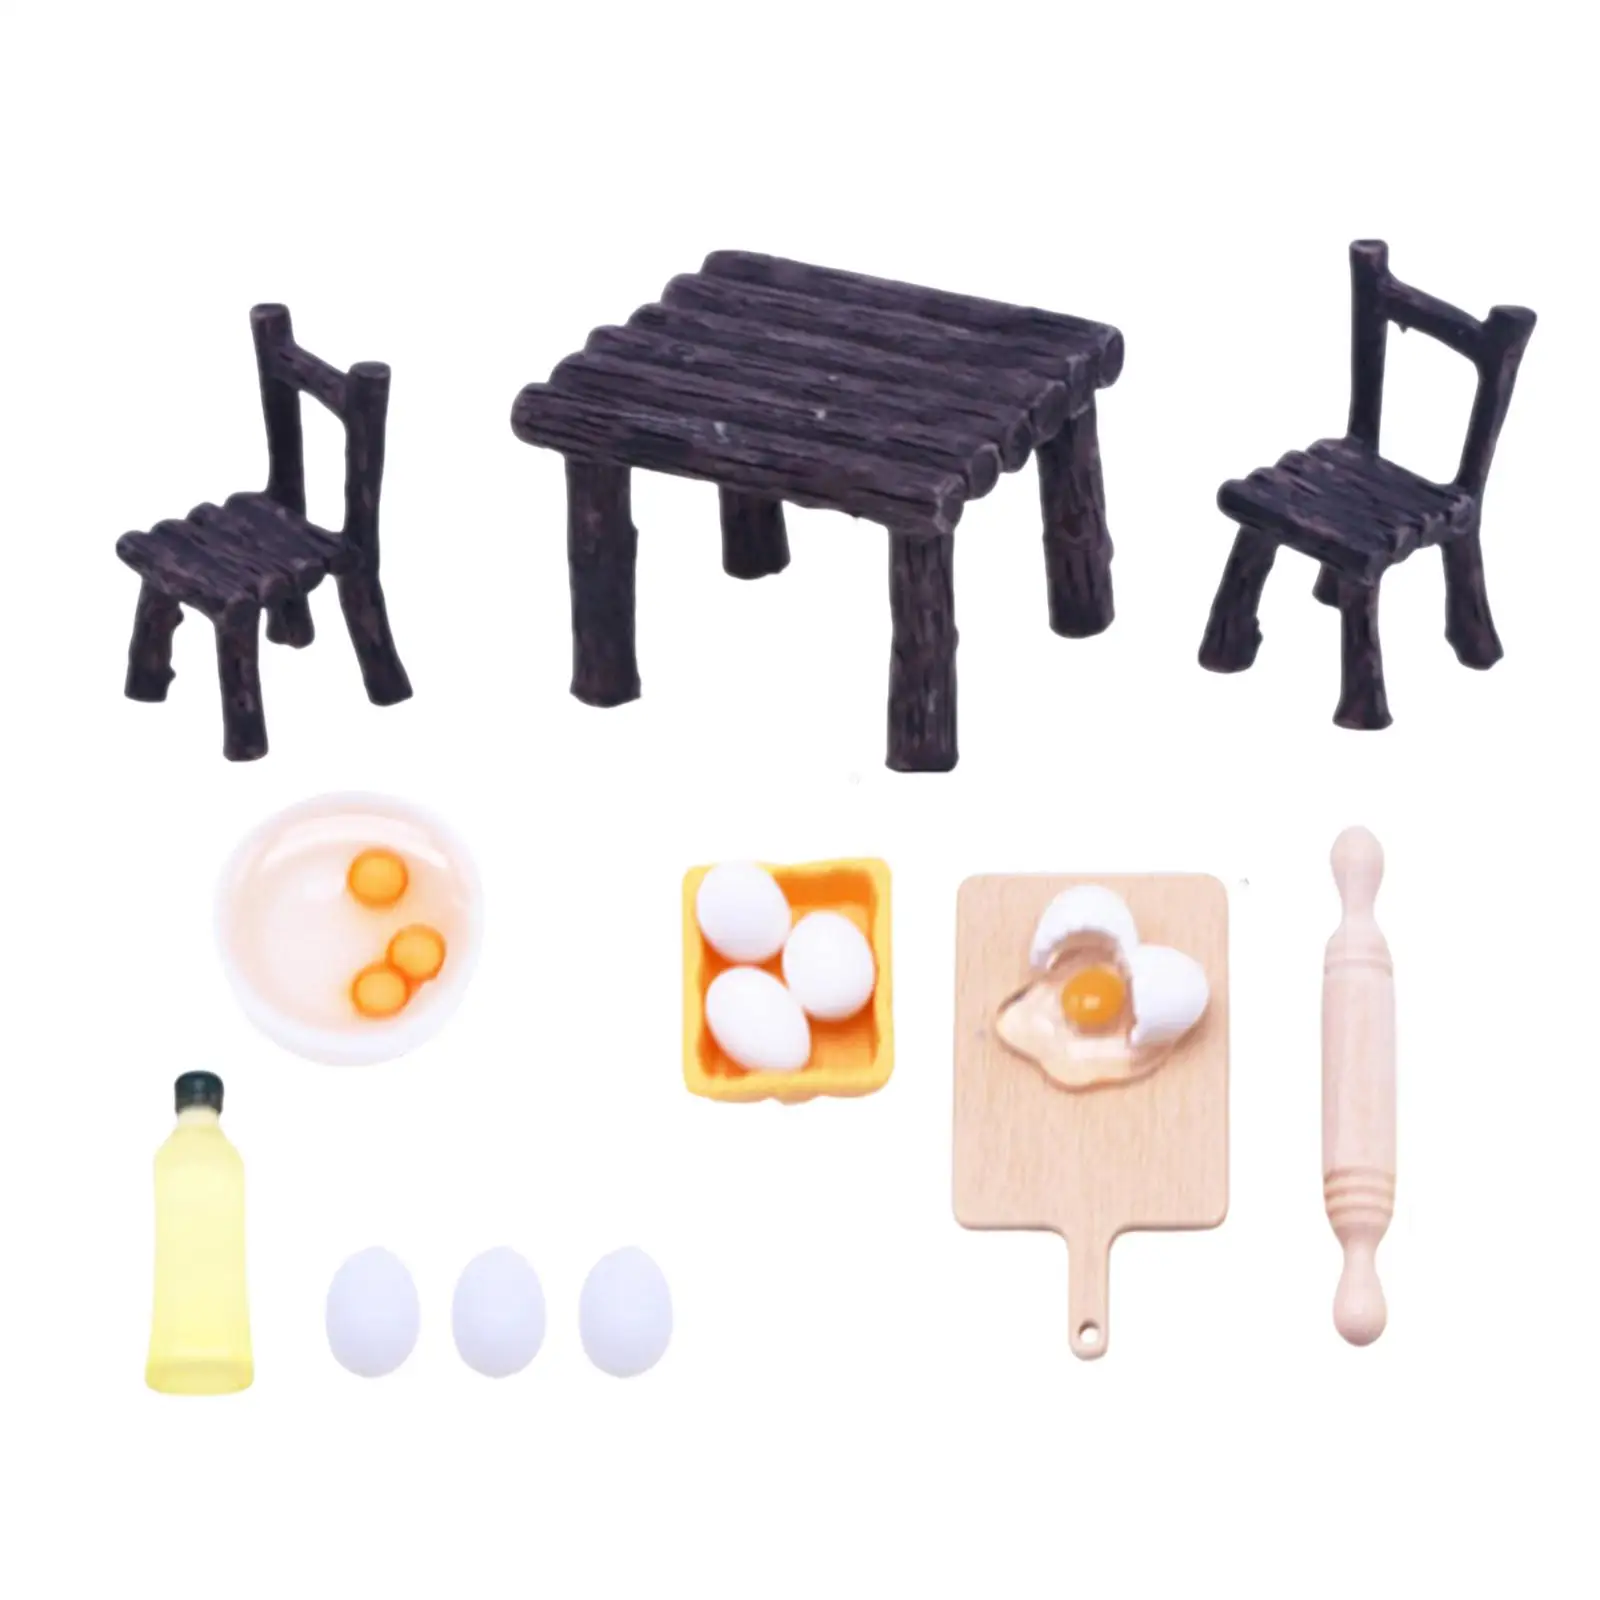 1/12 Miniature Play Sets Miniature Rolling Pin Pretend Play Set Best Gifts